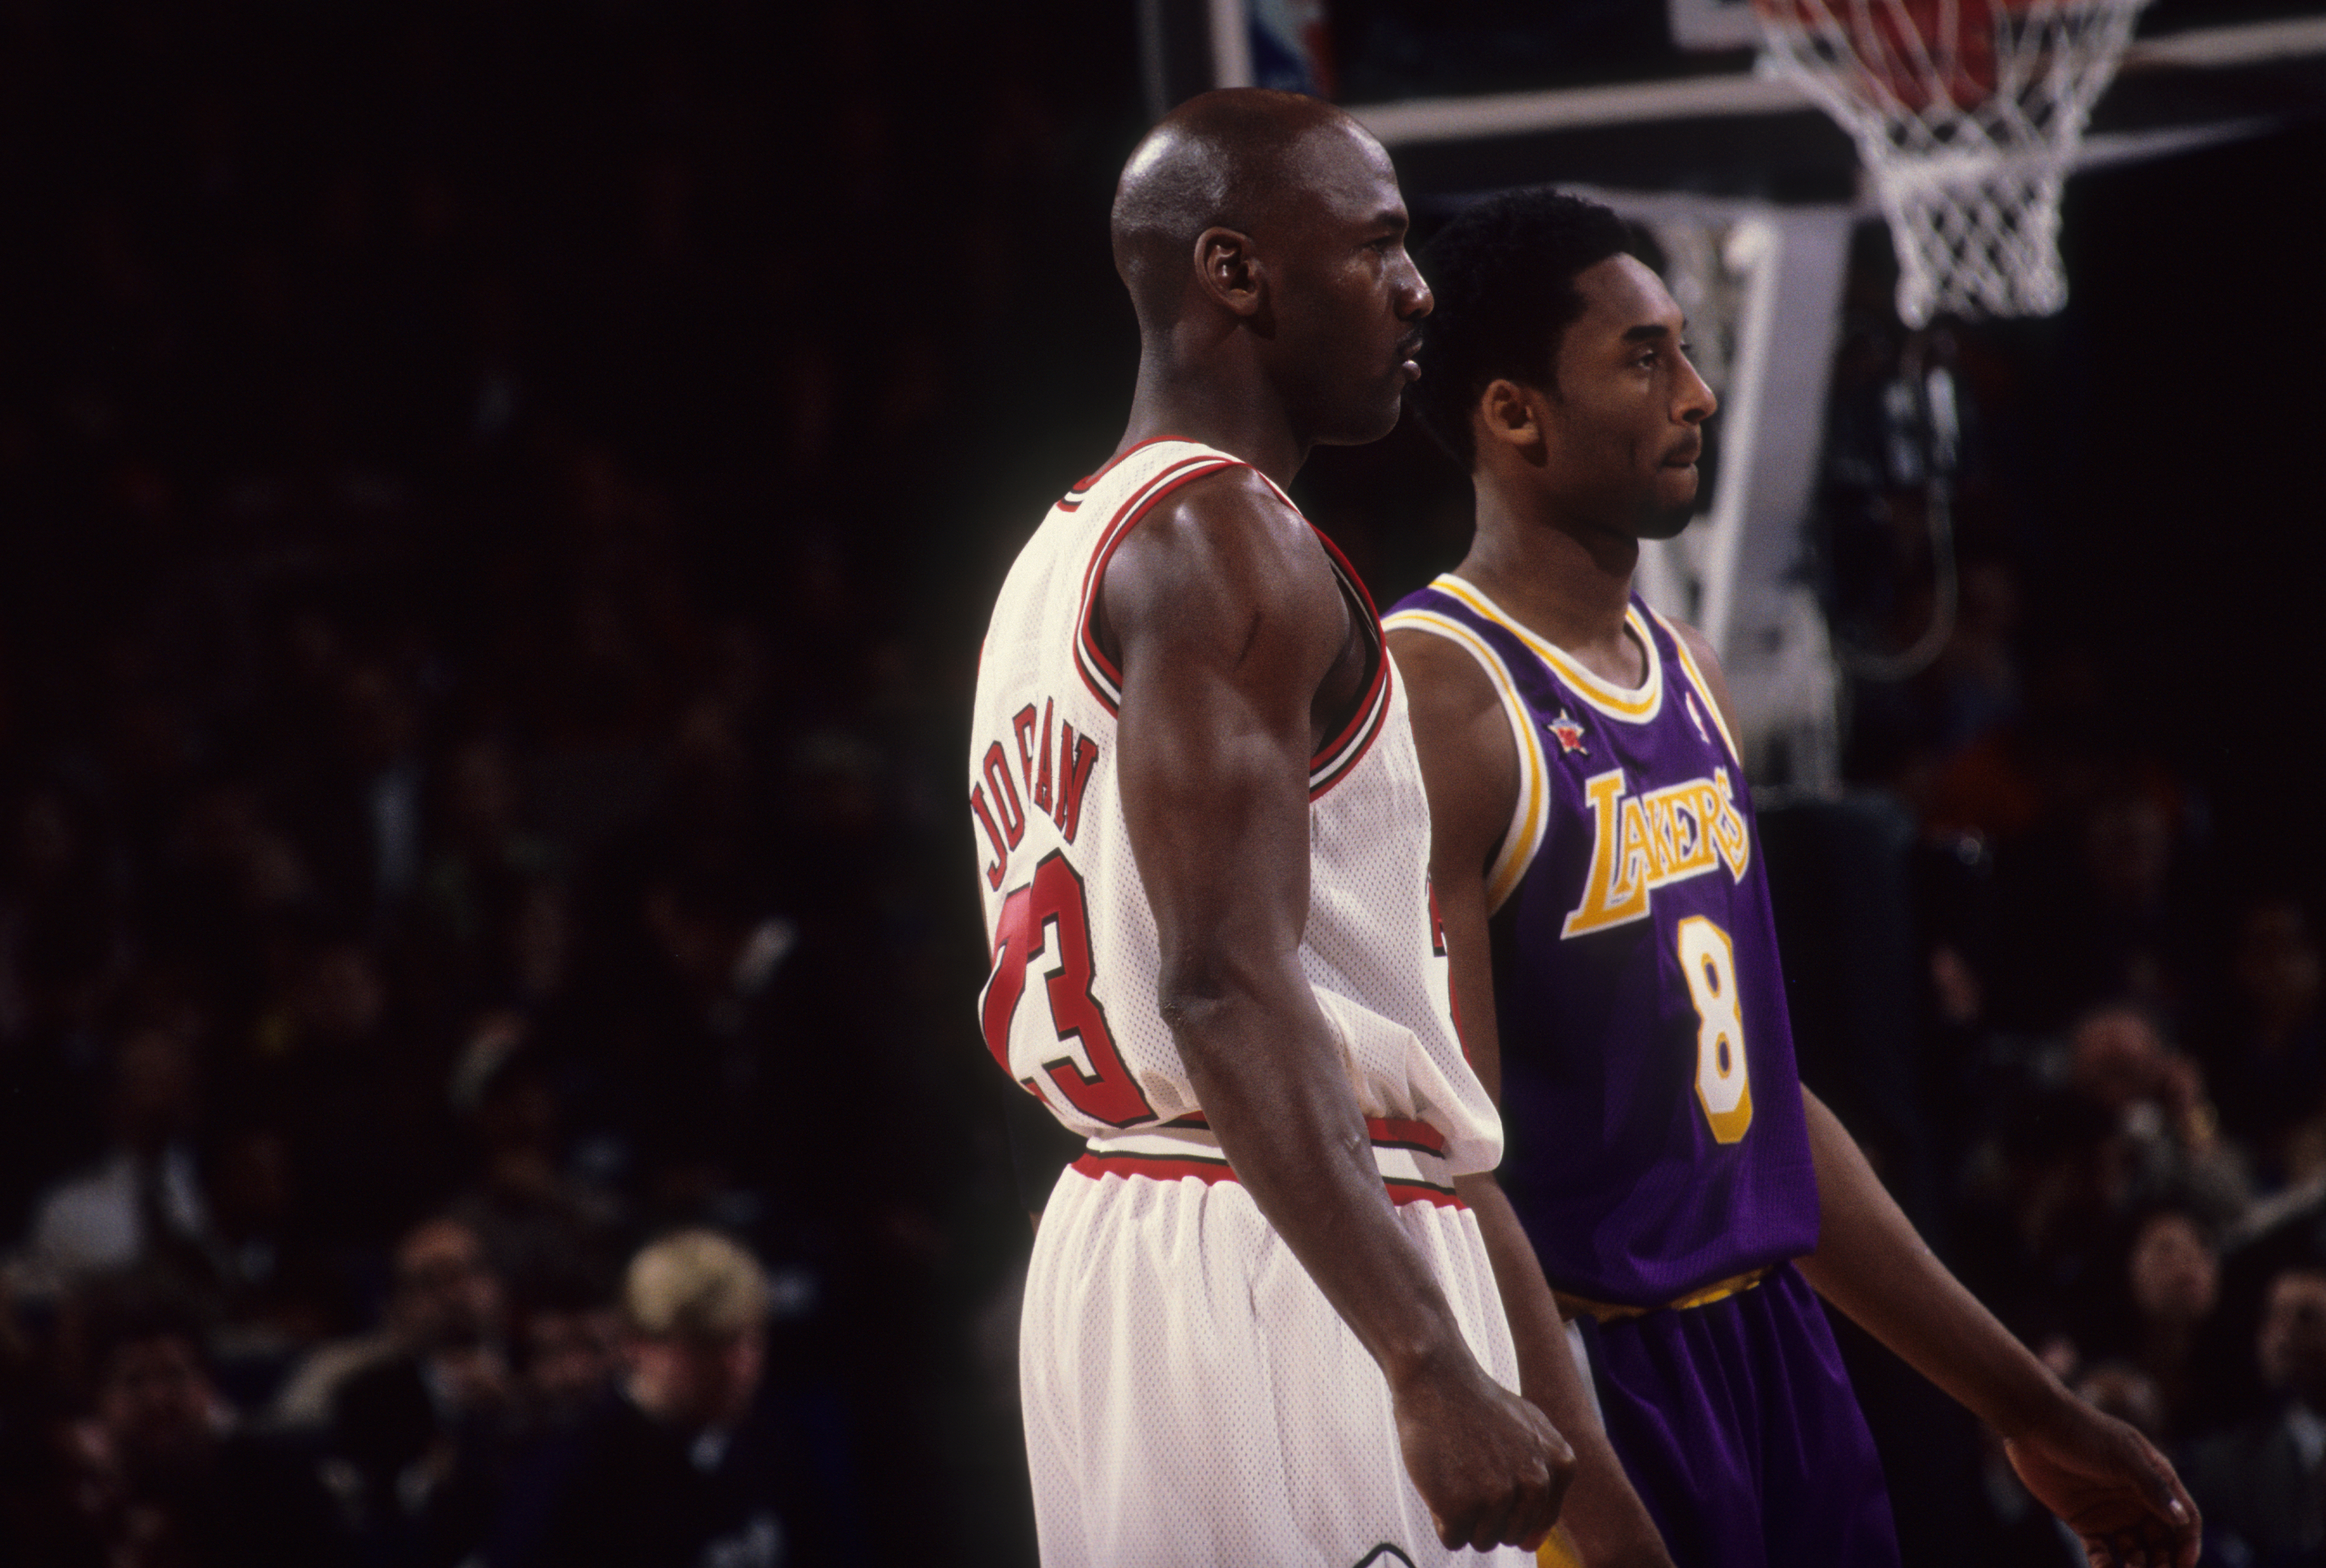 Kobe With Michael Jordan Jersey 👌 - The Real Joints of 90s